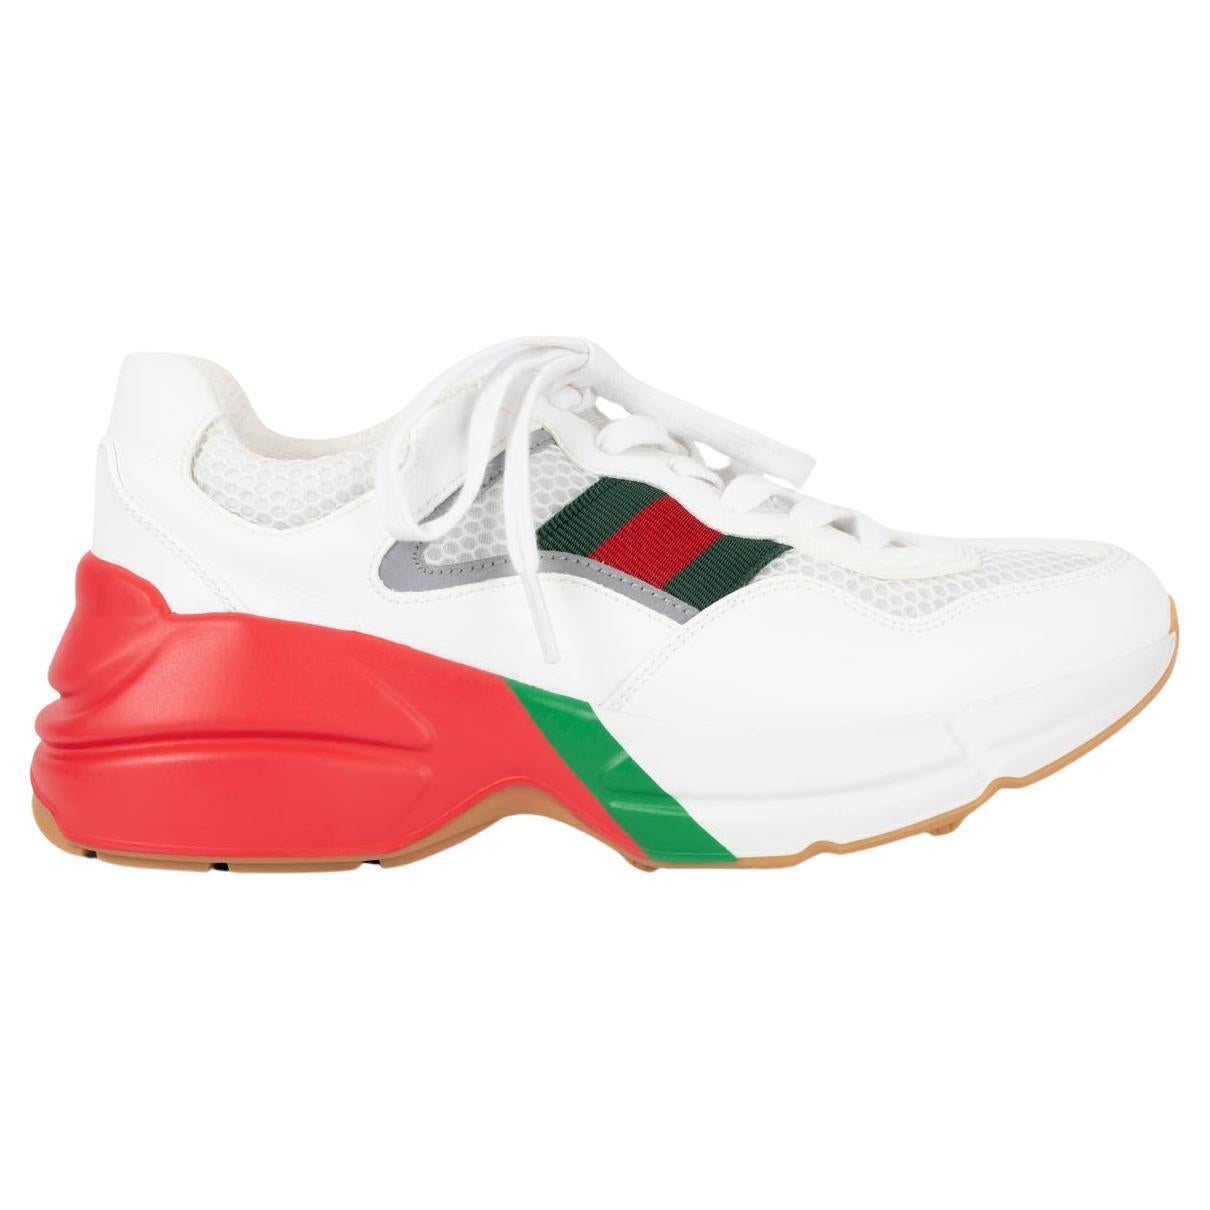 GUCCI white green red leather RYTHON Sneakers Shoes 36.5 For Sale